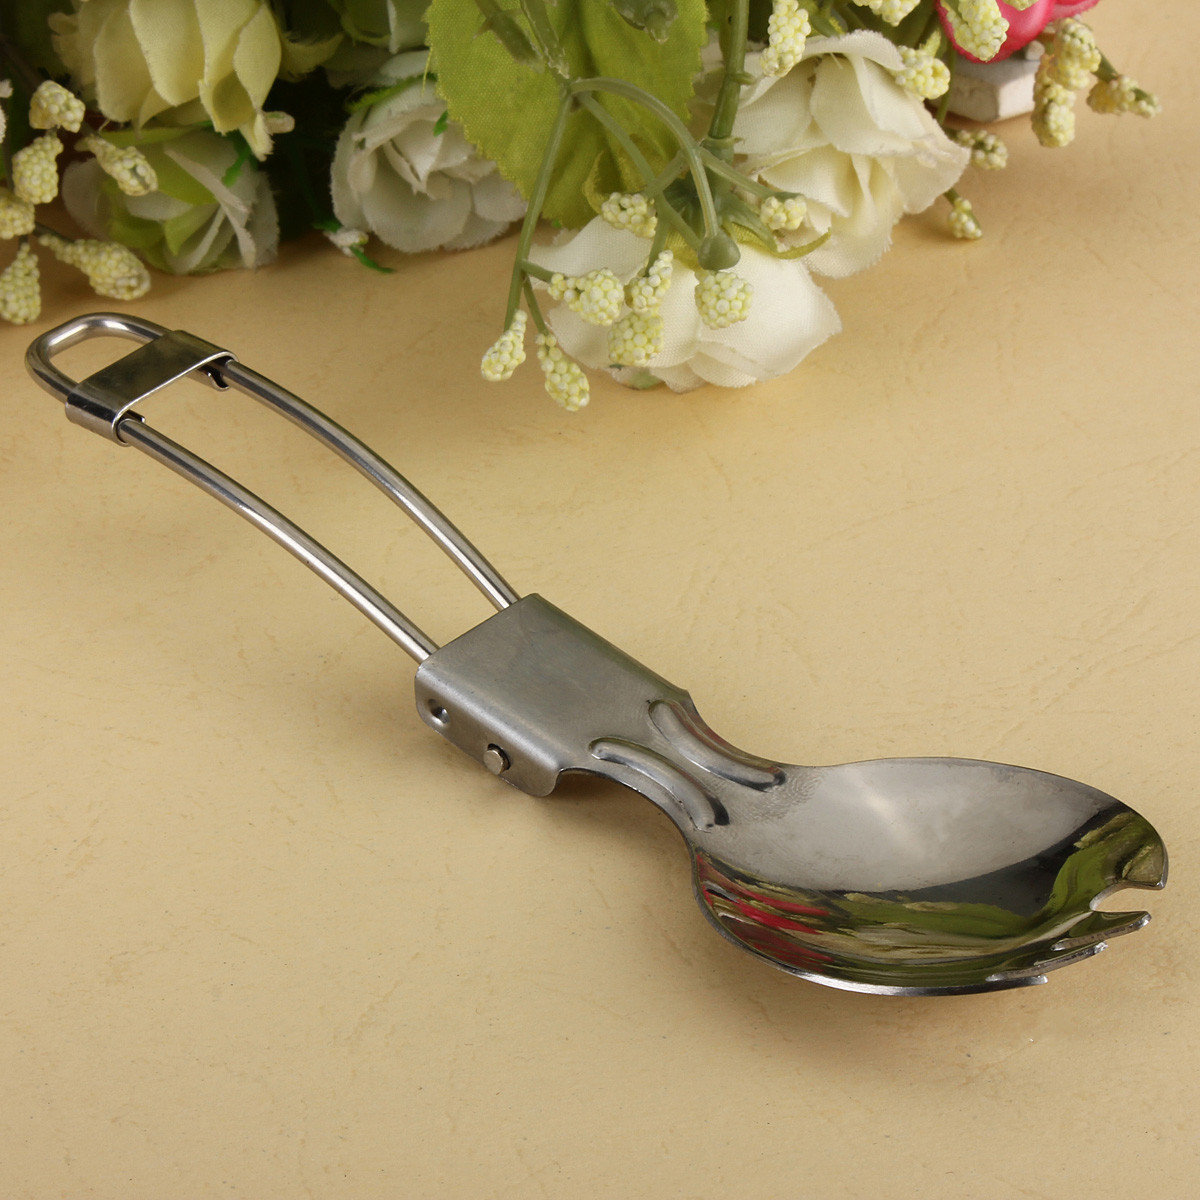 Outdoor Cookout Picnic Stainless Steel Foldable Spoon Fork for Camping Hiking от Newchic WW